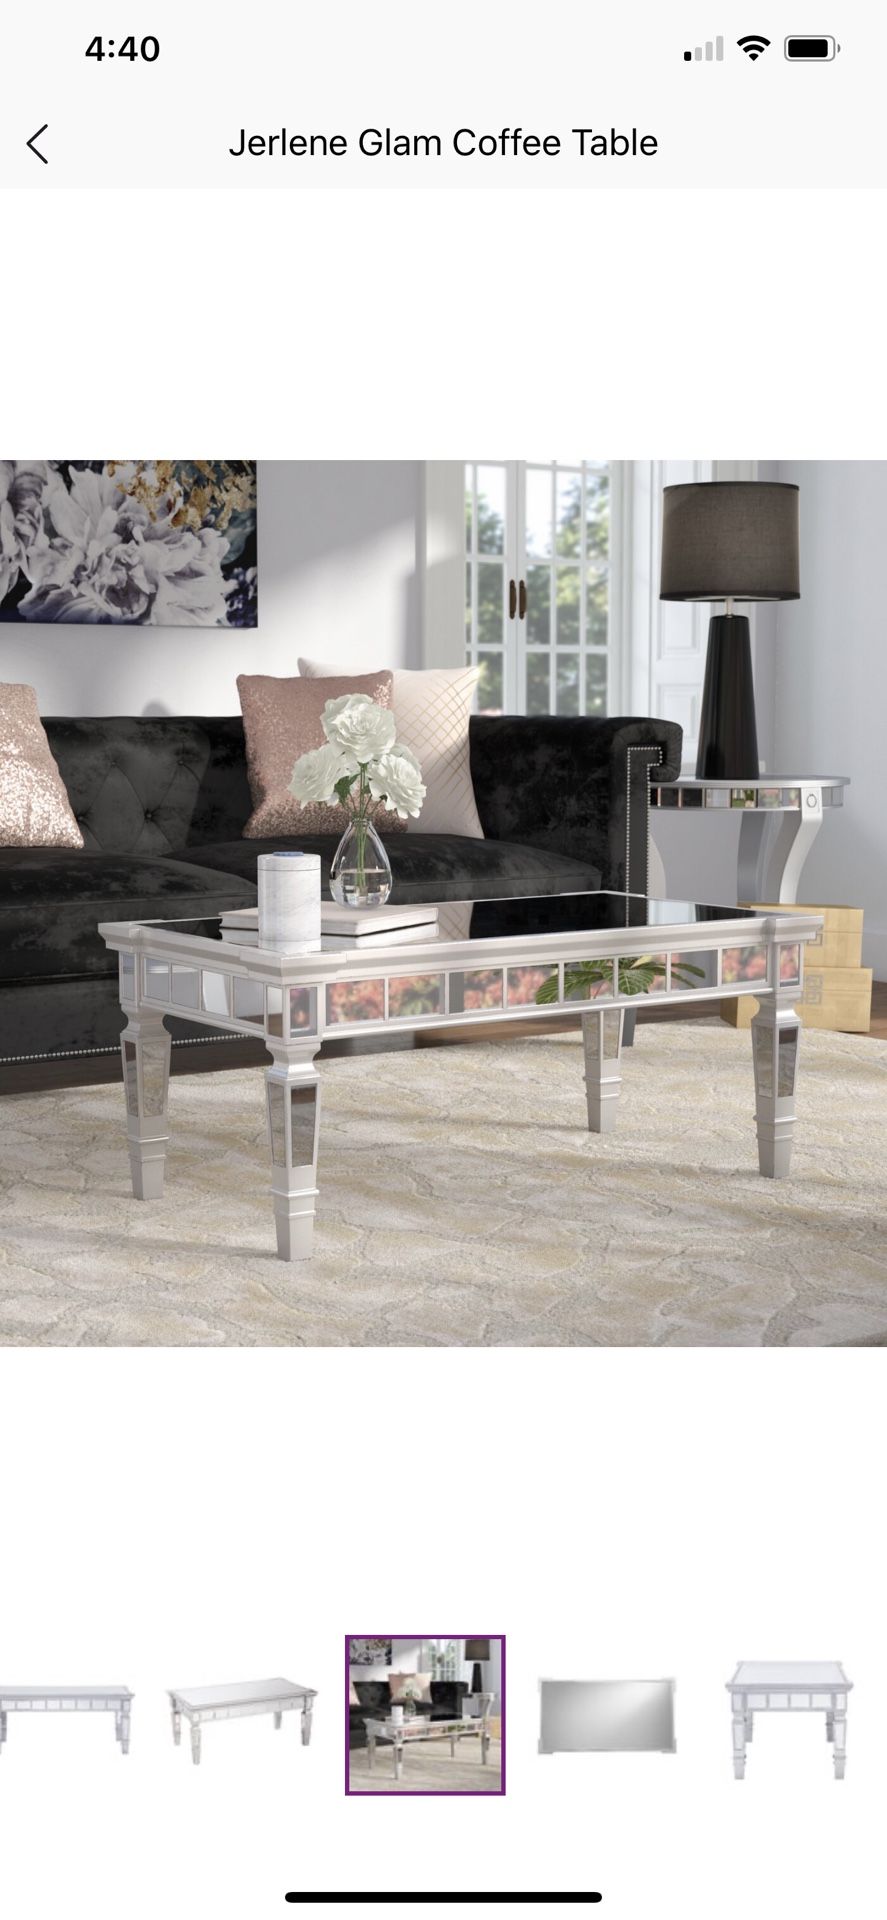 Brand new, Never Open/Used Jerlene Mirrored Coffee Table